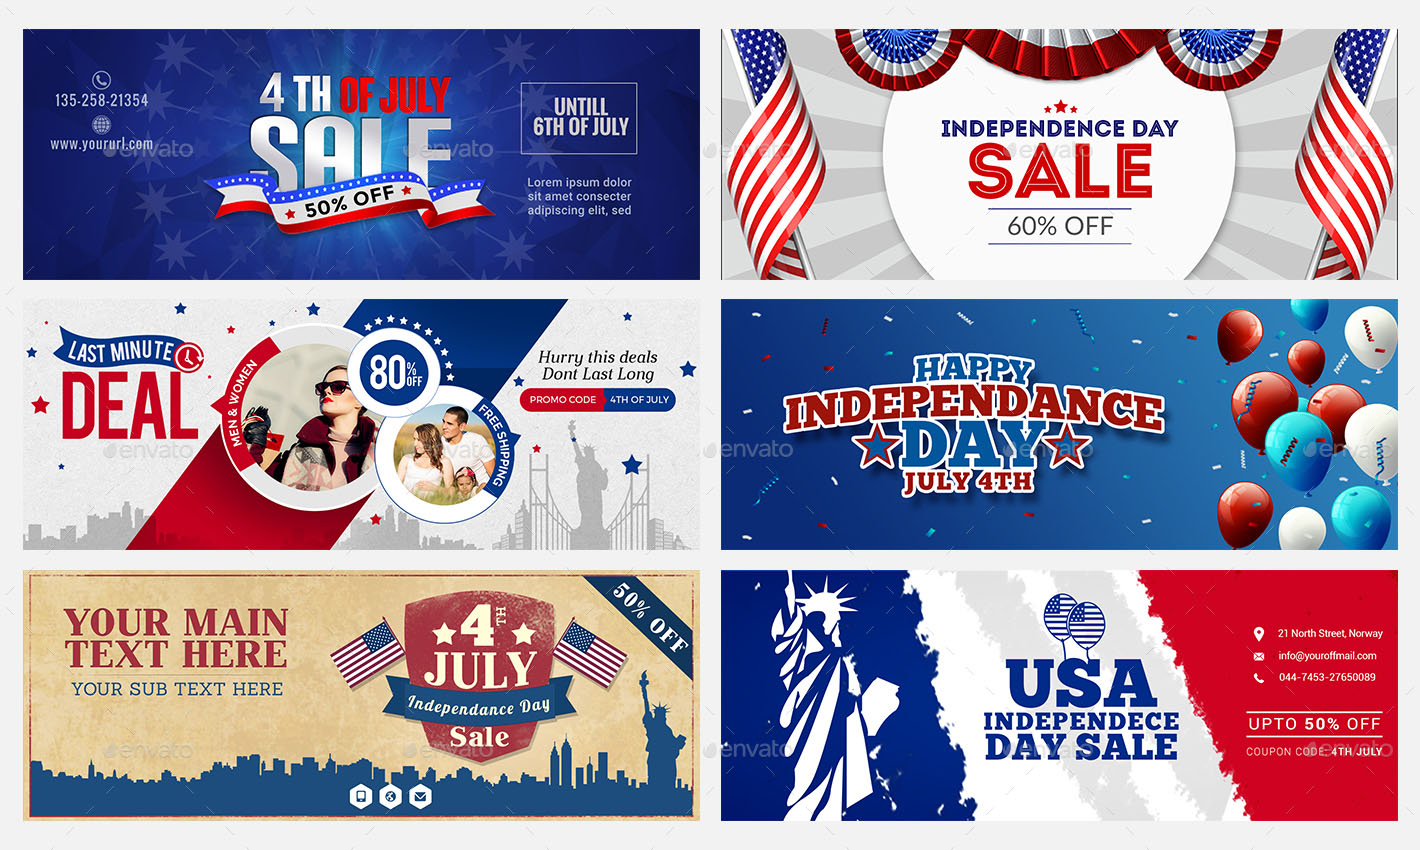 22+PREMIUM & FREE 22th OF JULY ELEMENTS AND READY-MADE TEMPLATES For 4Th Of July Menu Template